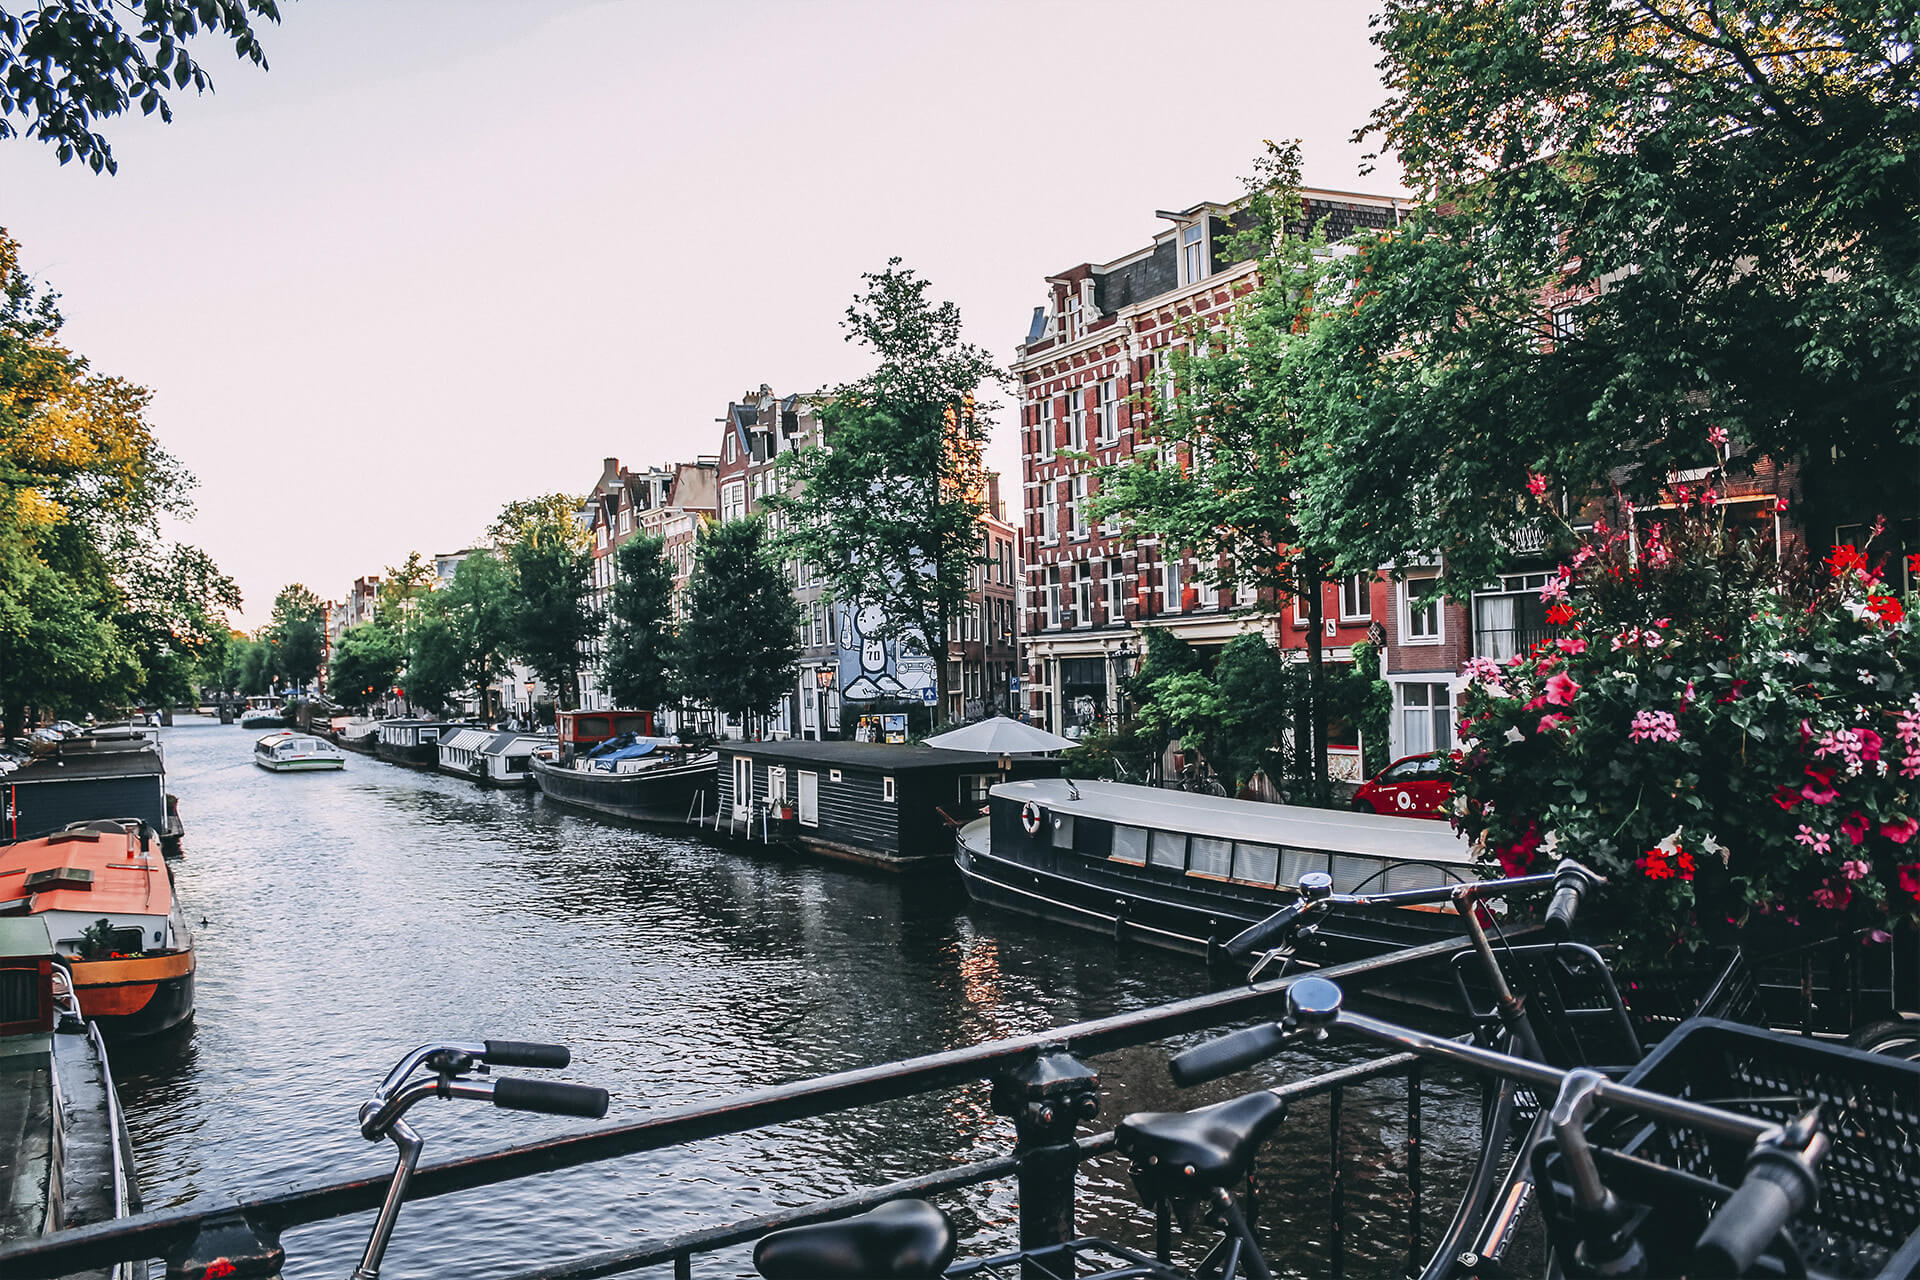 A photo of a river in Amsterdam